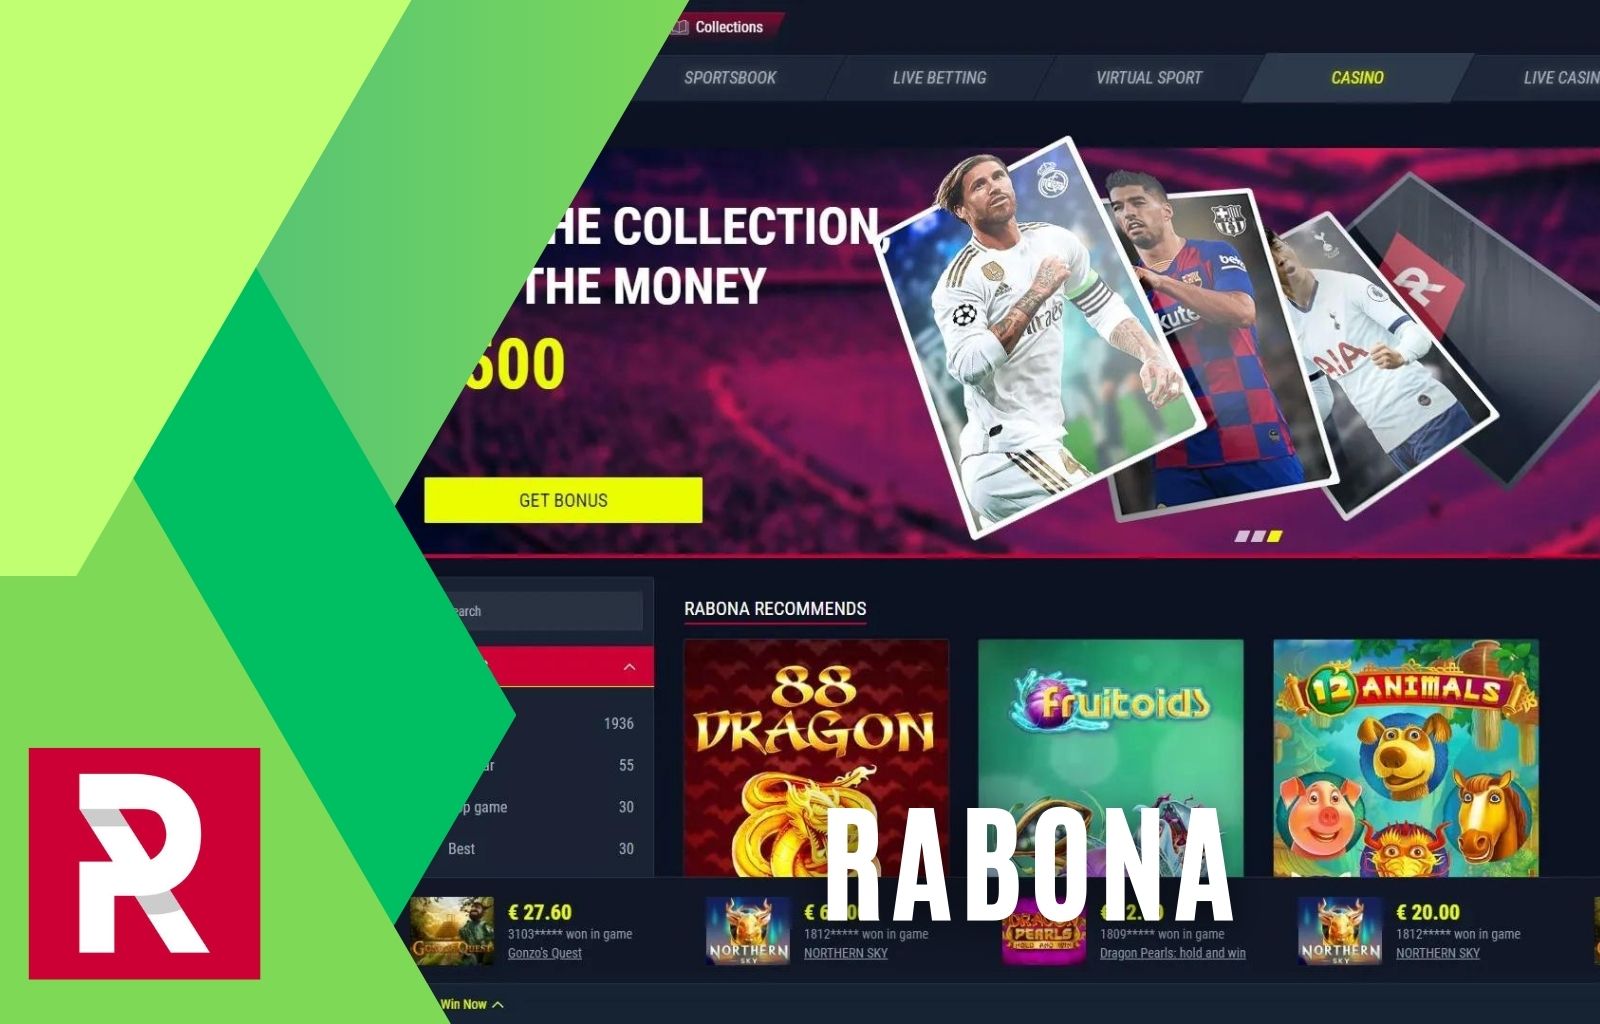 Review of Rabona: a Little Information About the Betting Company